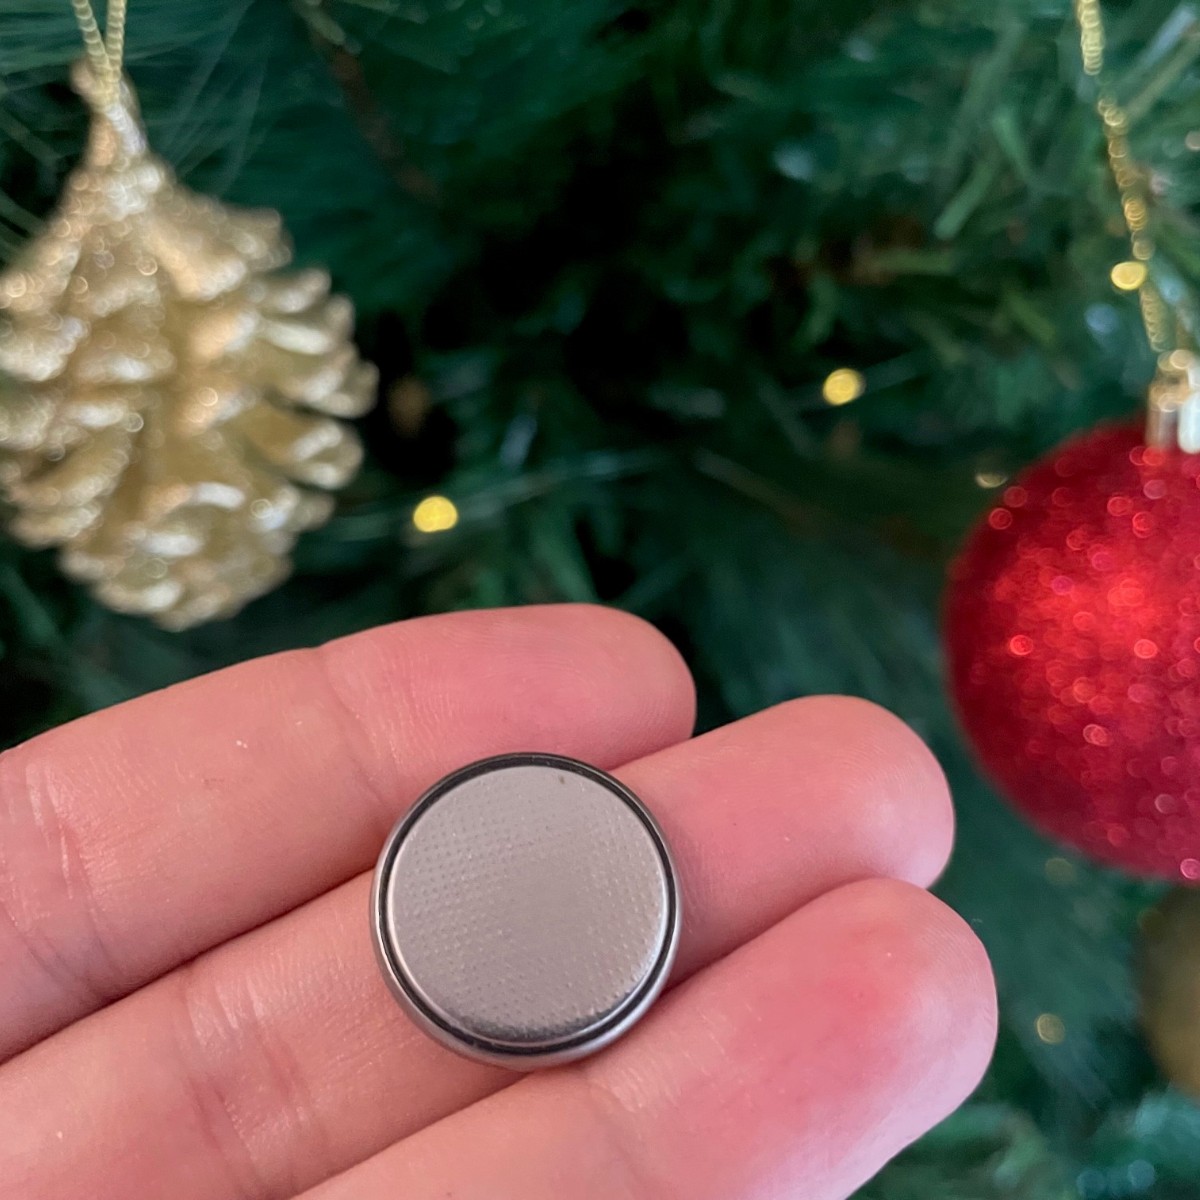 We all need a recharge over the holidays 😊 but when you've got small 🔋 like this lying around the house, it's very easy for children to swallow them ⚠️ Keep batteries for presents away from children where possible. Stay safe, New Zealand 🎄 #Health #Safety #Holidays #Toys